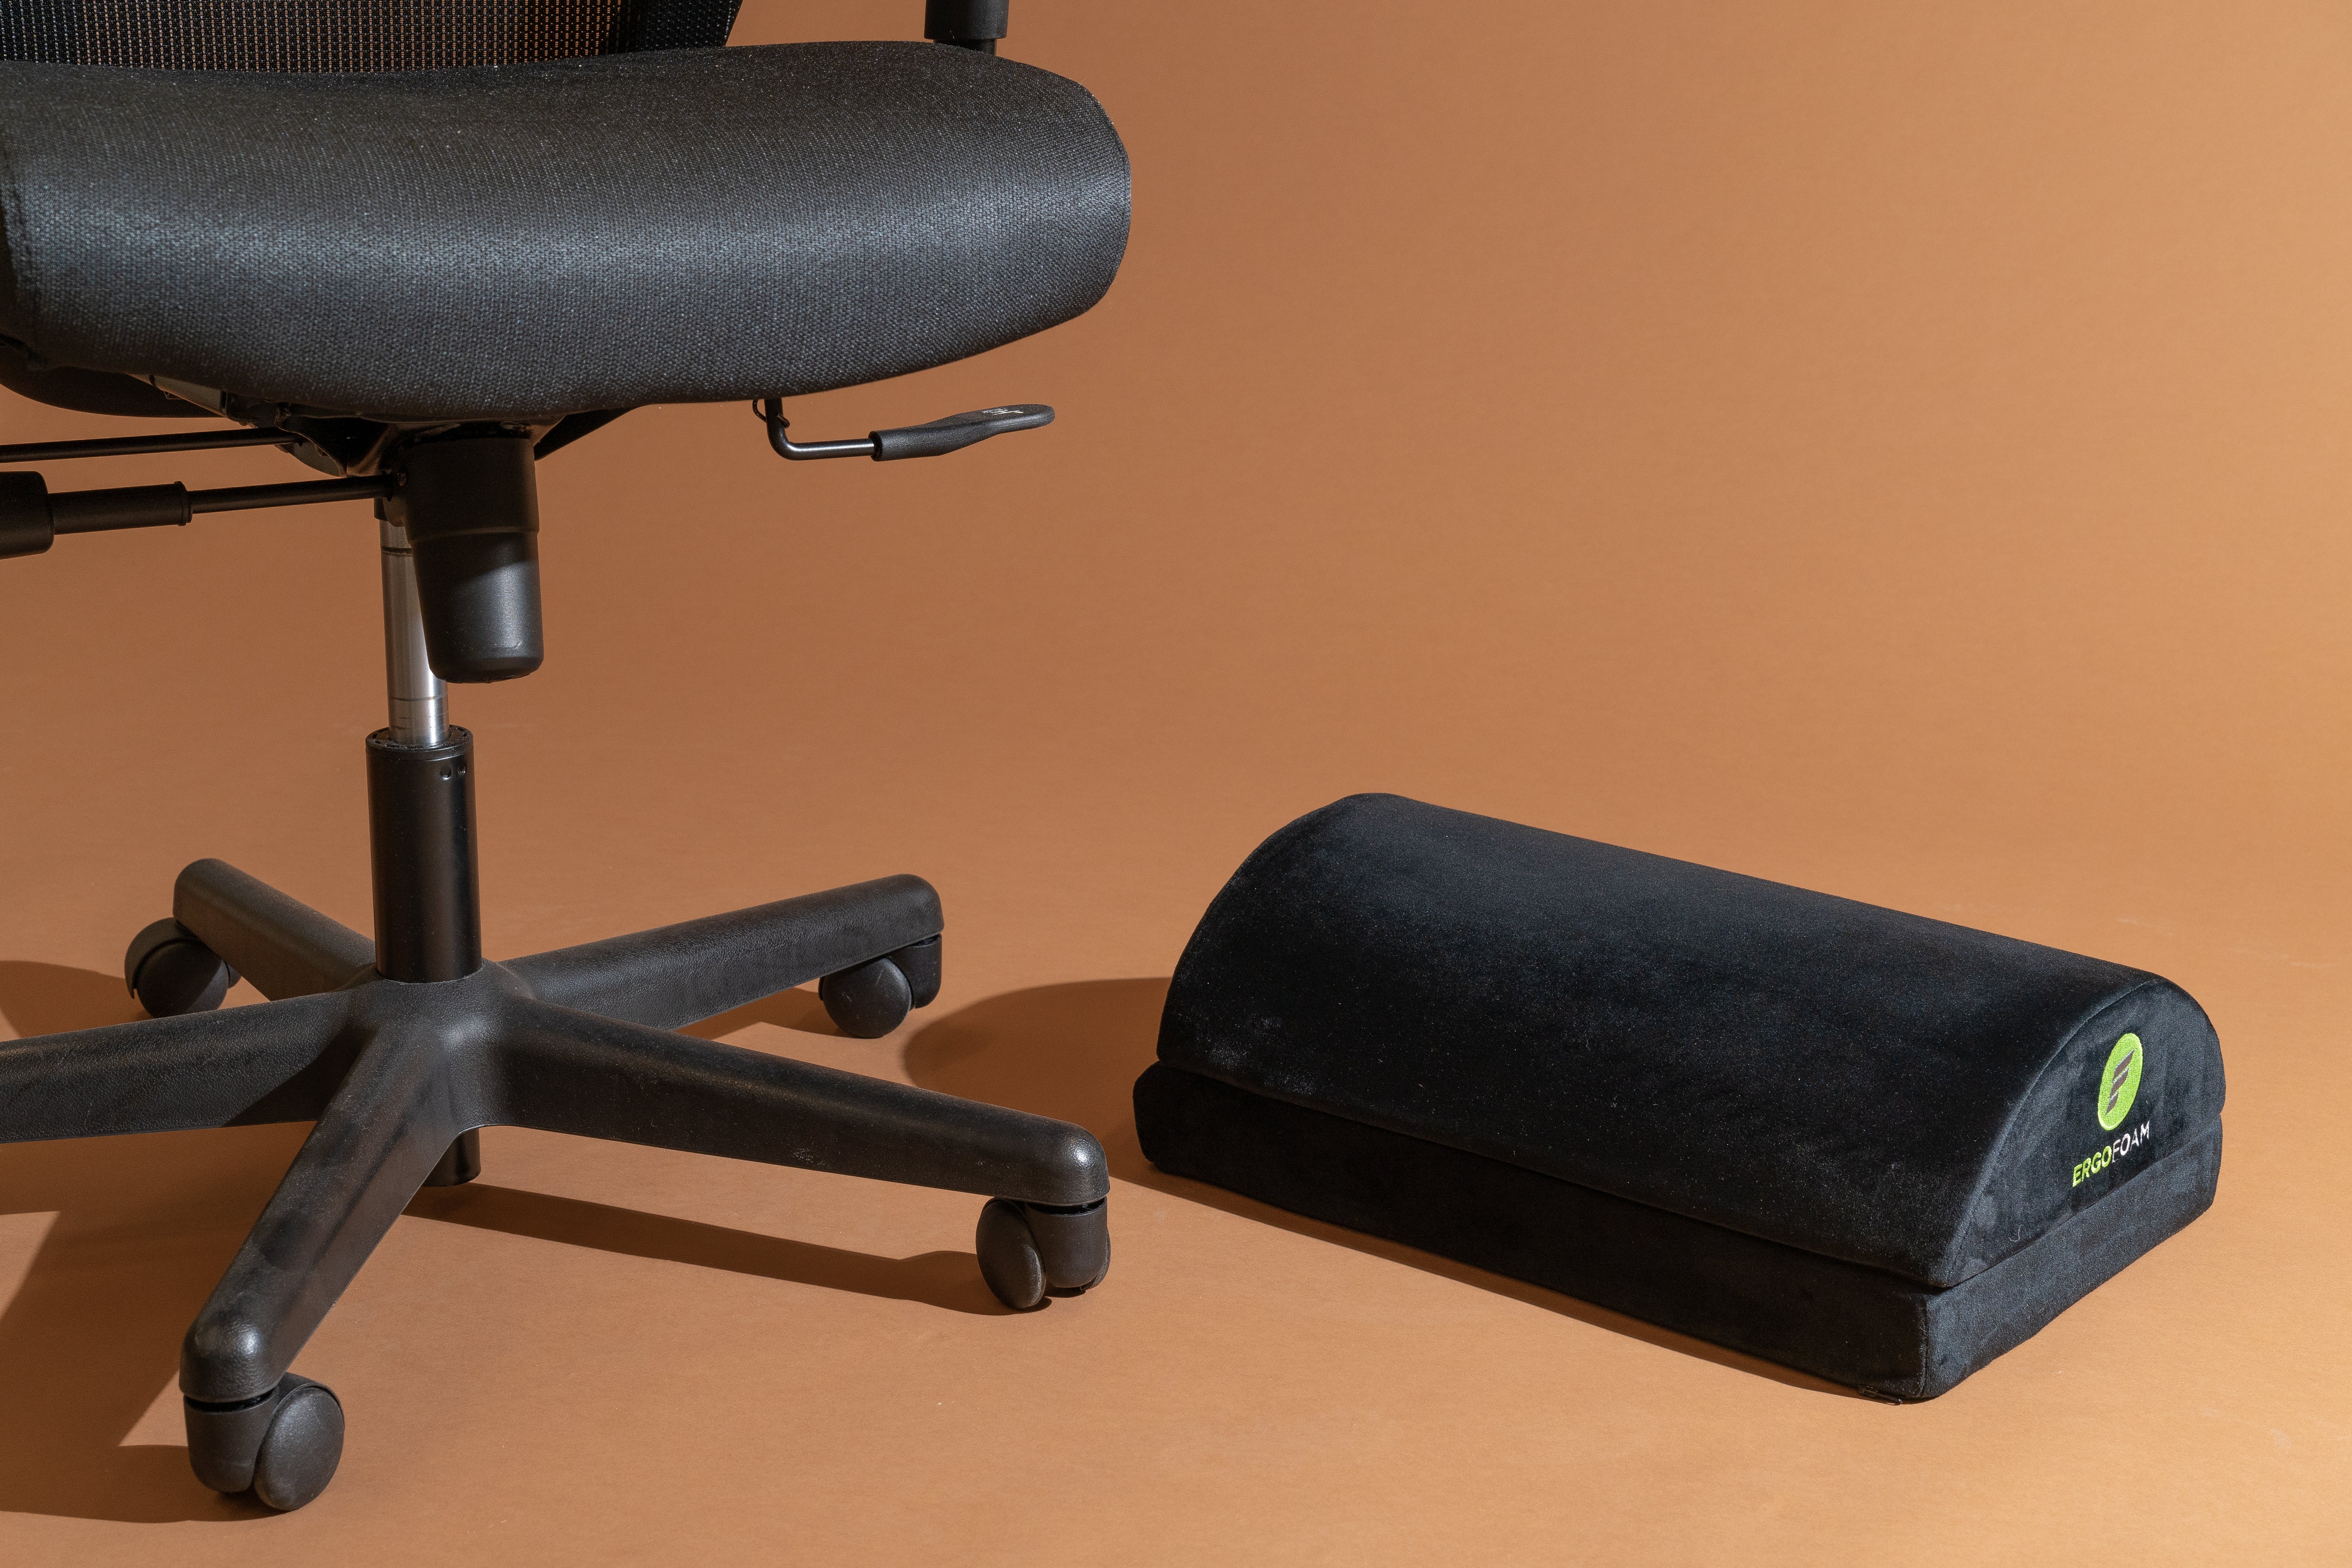 An office chair with the ErgoFoam Adjustable Foot Rest